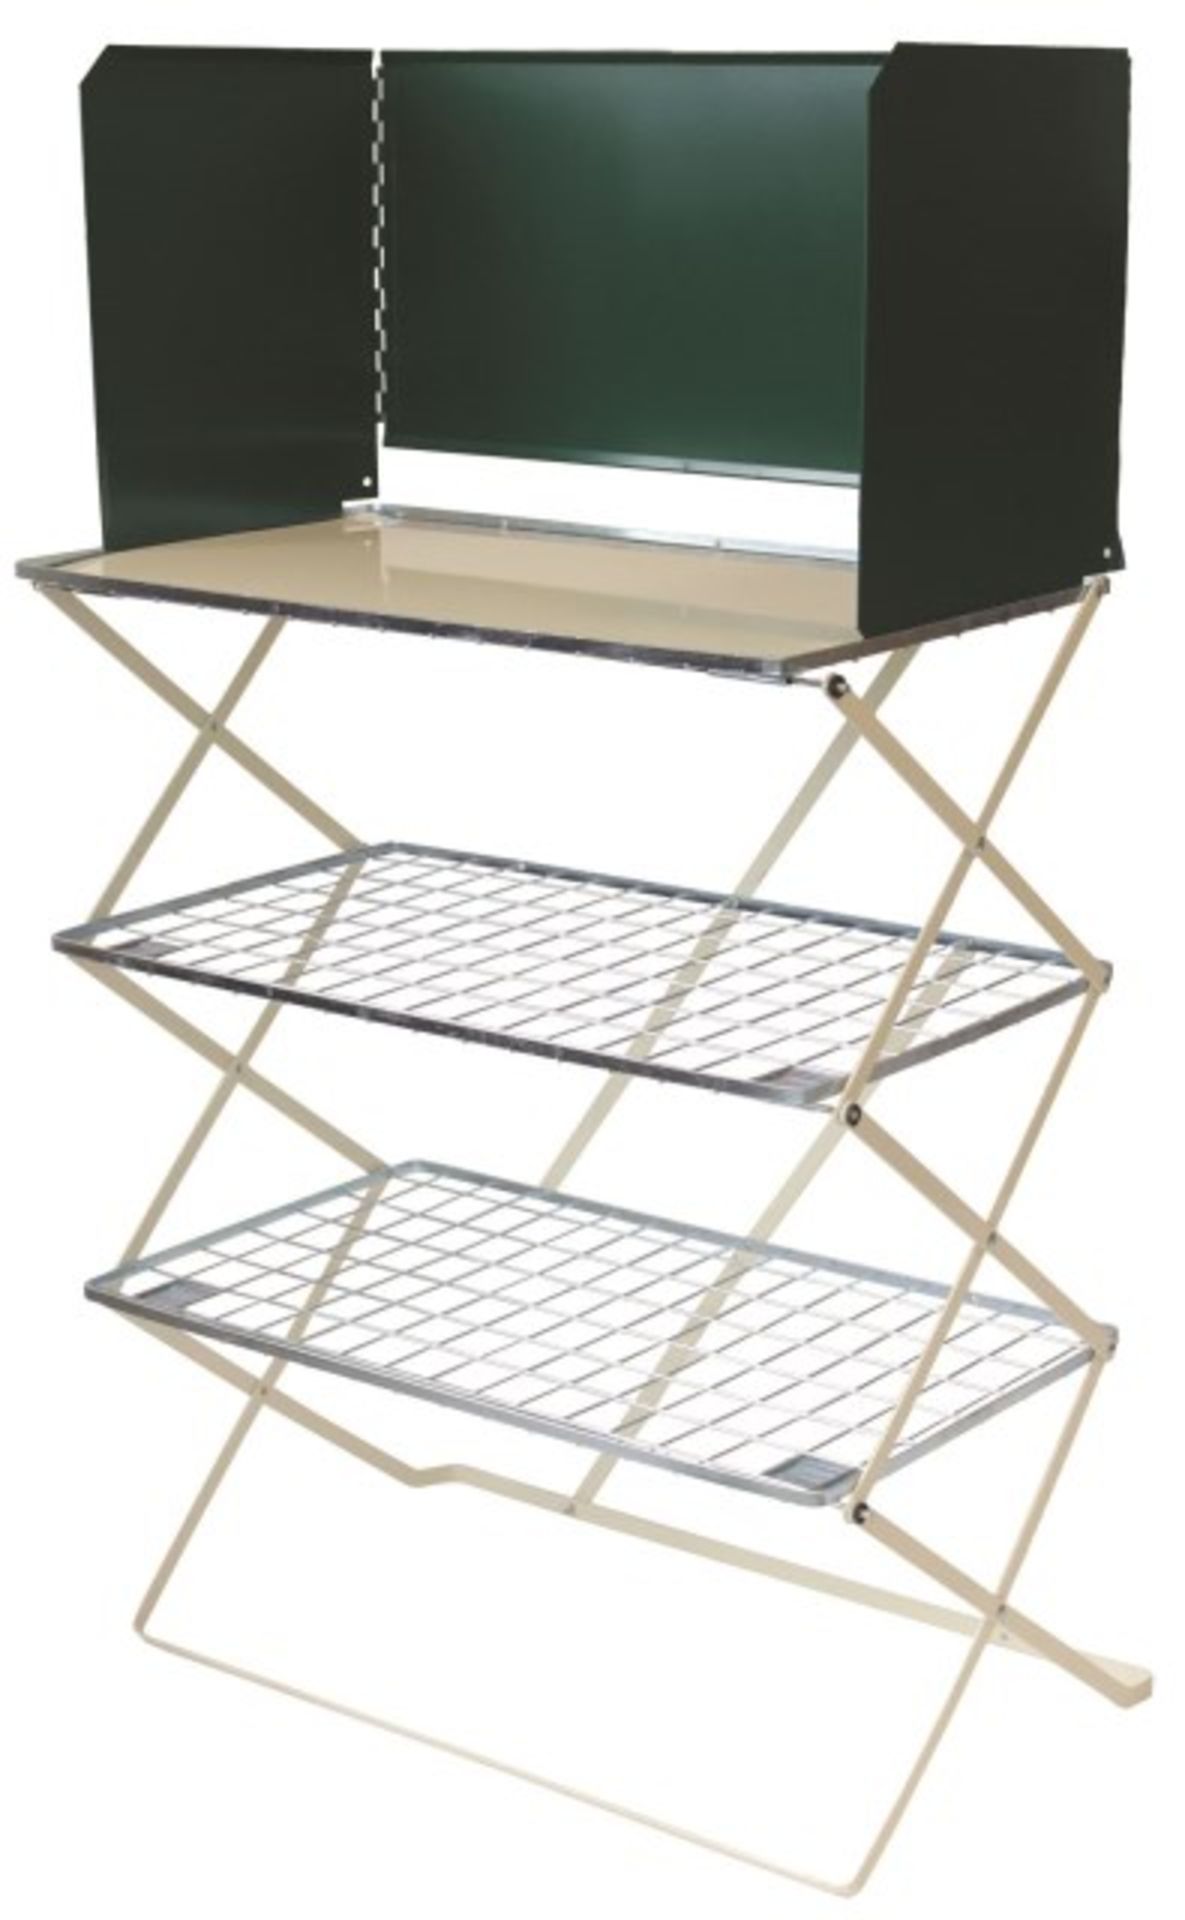 + VAT Brand New 3 Tier Concertina Workstation With Carrybag And Detatchable Wind Shield RRP39.99